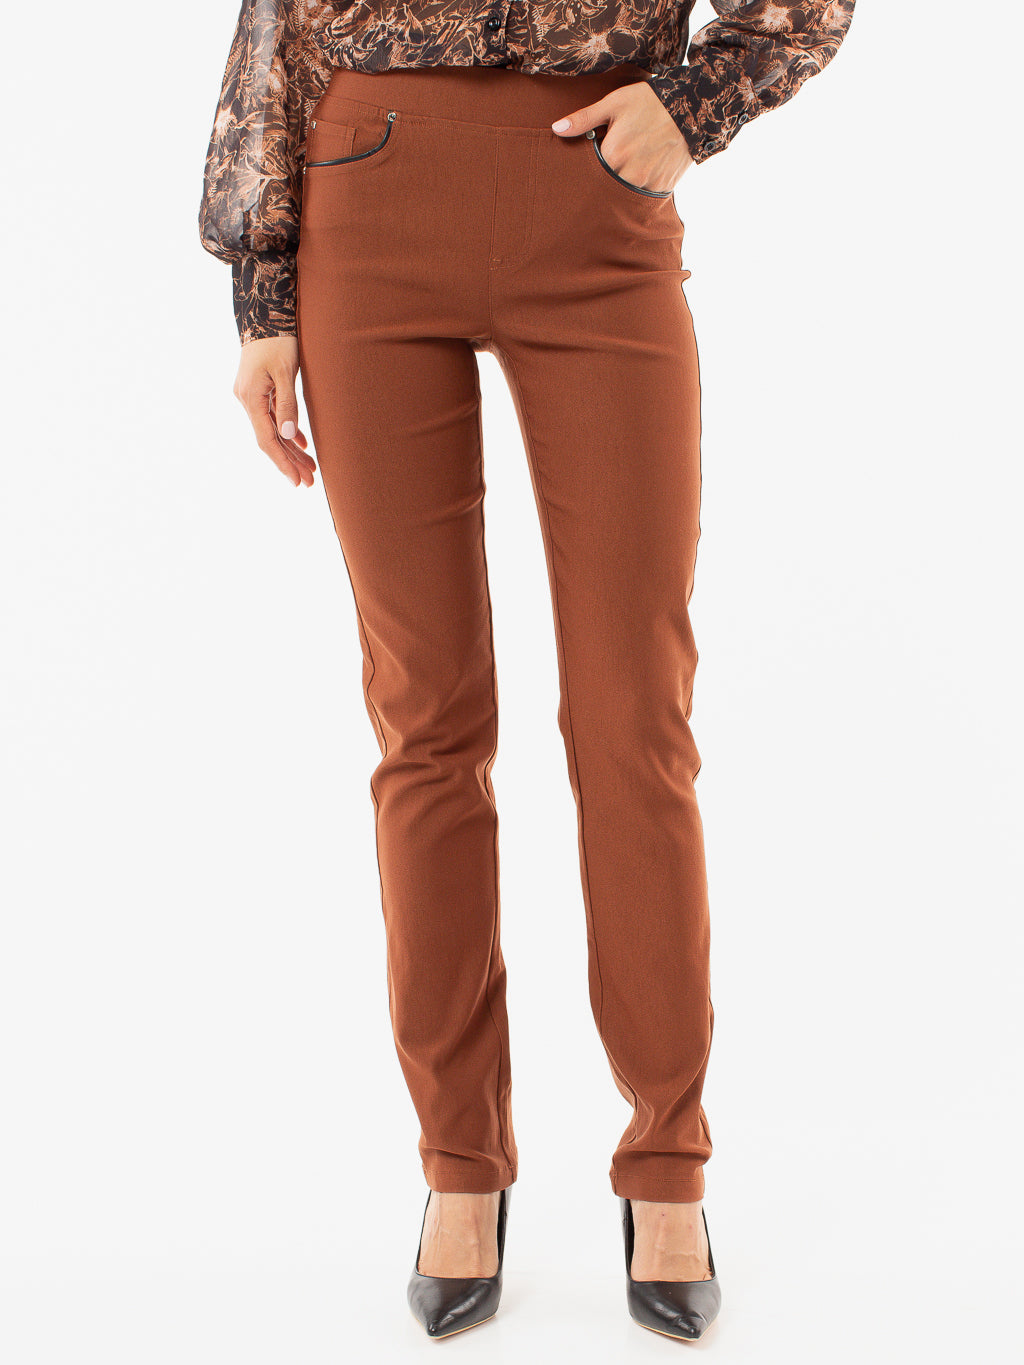 Narrow fitted pull-on pant